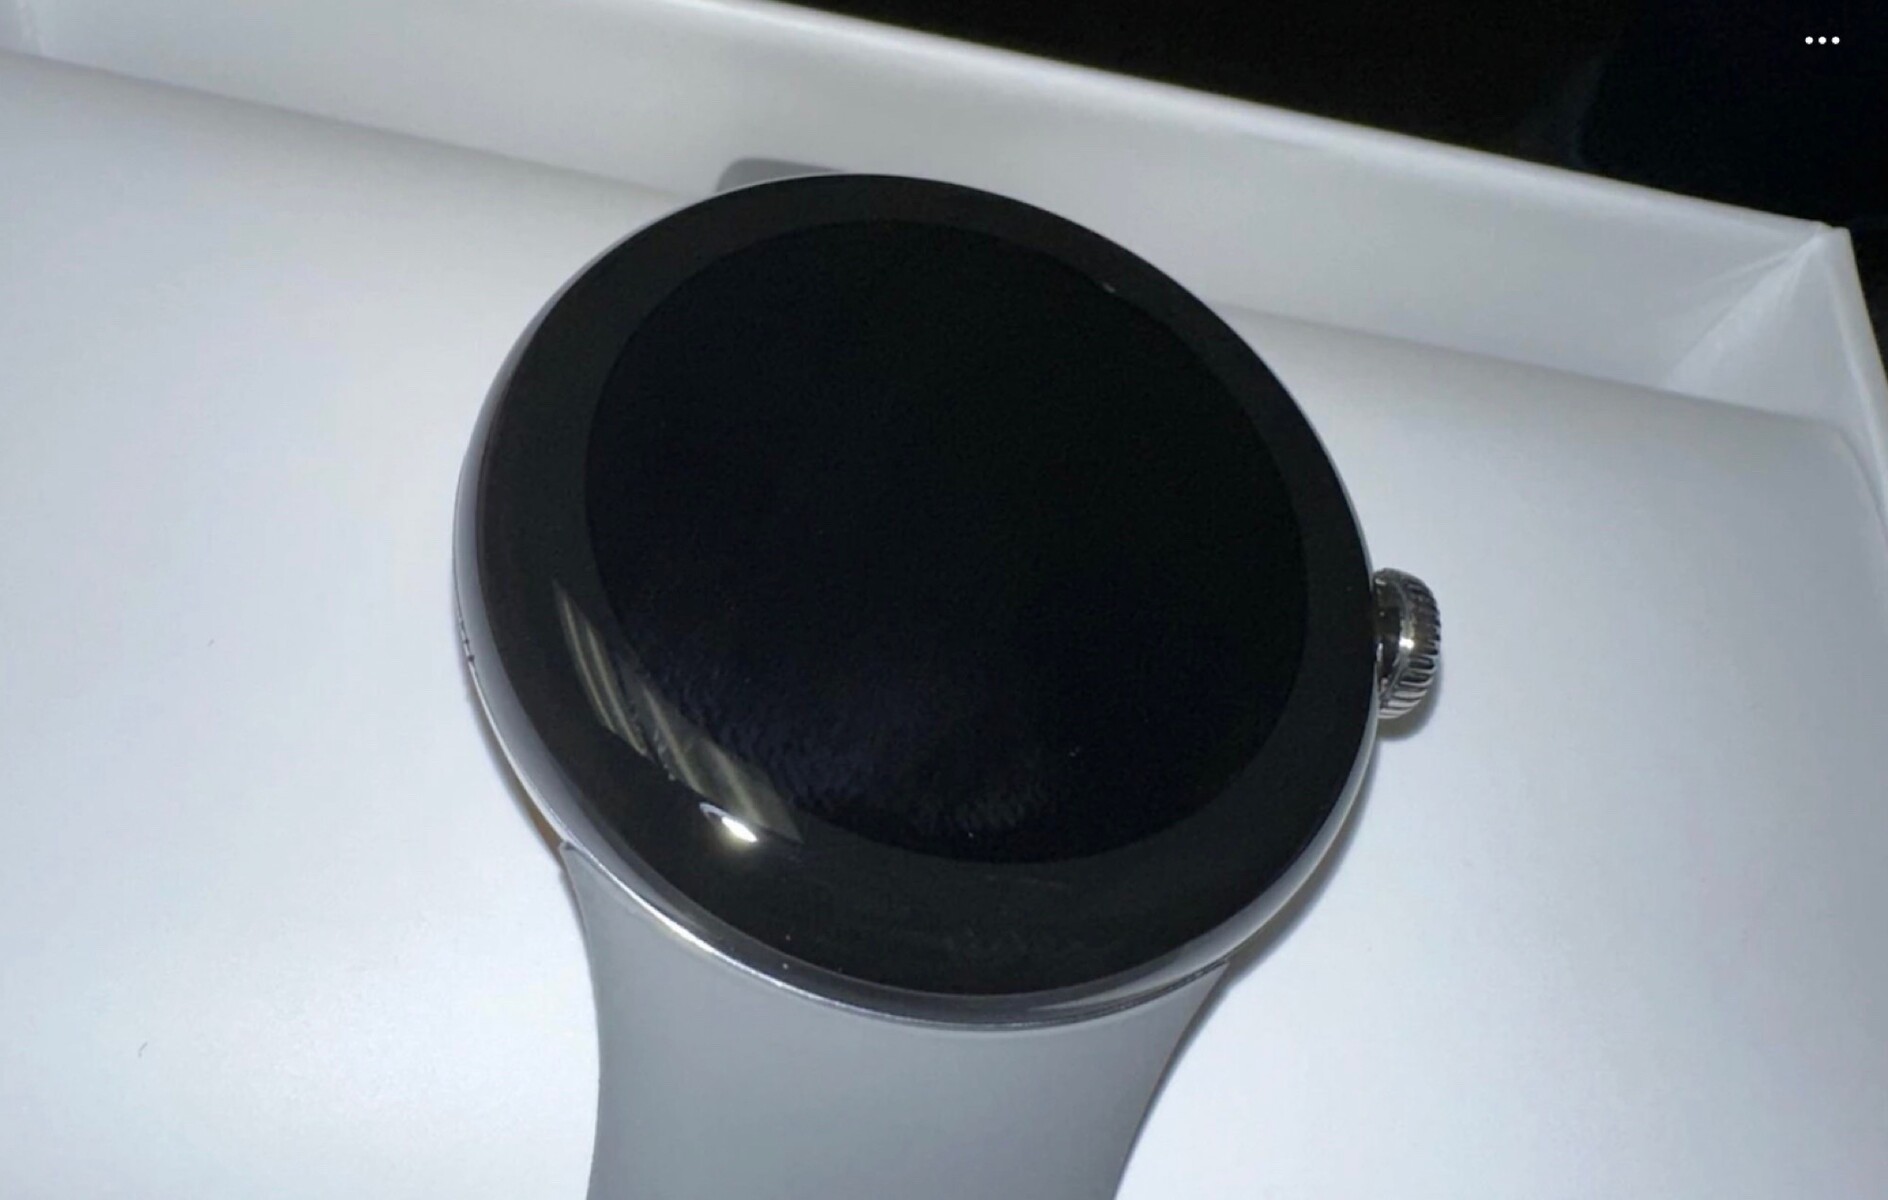 Google Pixel prices News photos leak Watch: thick watch as show - Unboxing NotebookCheck.net band display bezels